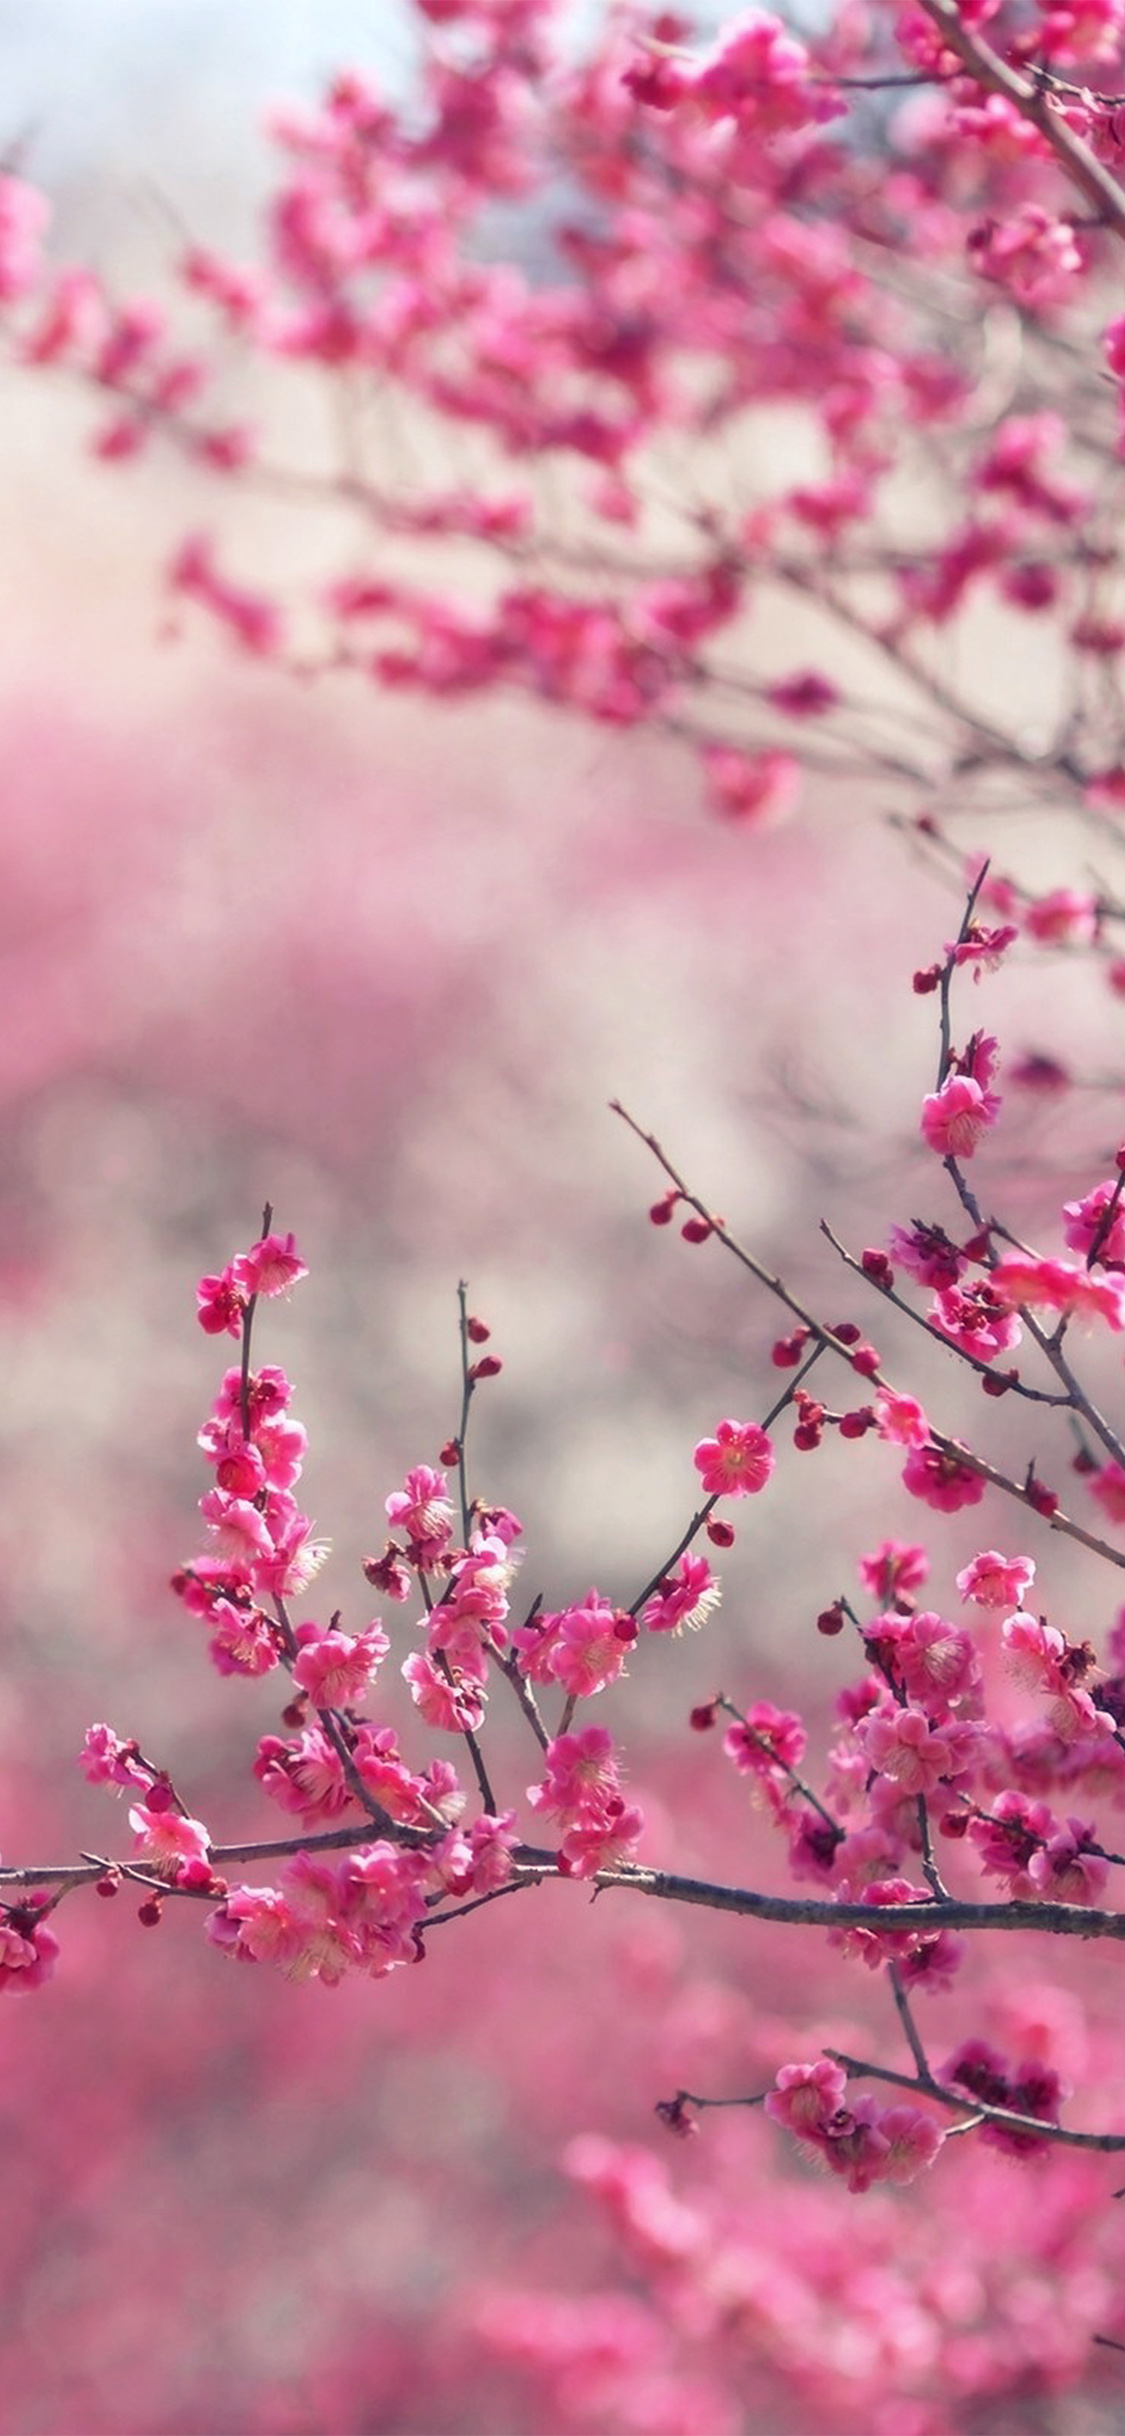 iPhone X wallpaper. pink blossom nature flower spring love